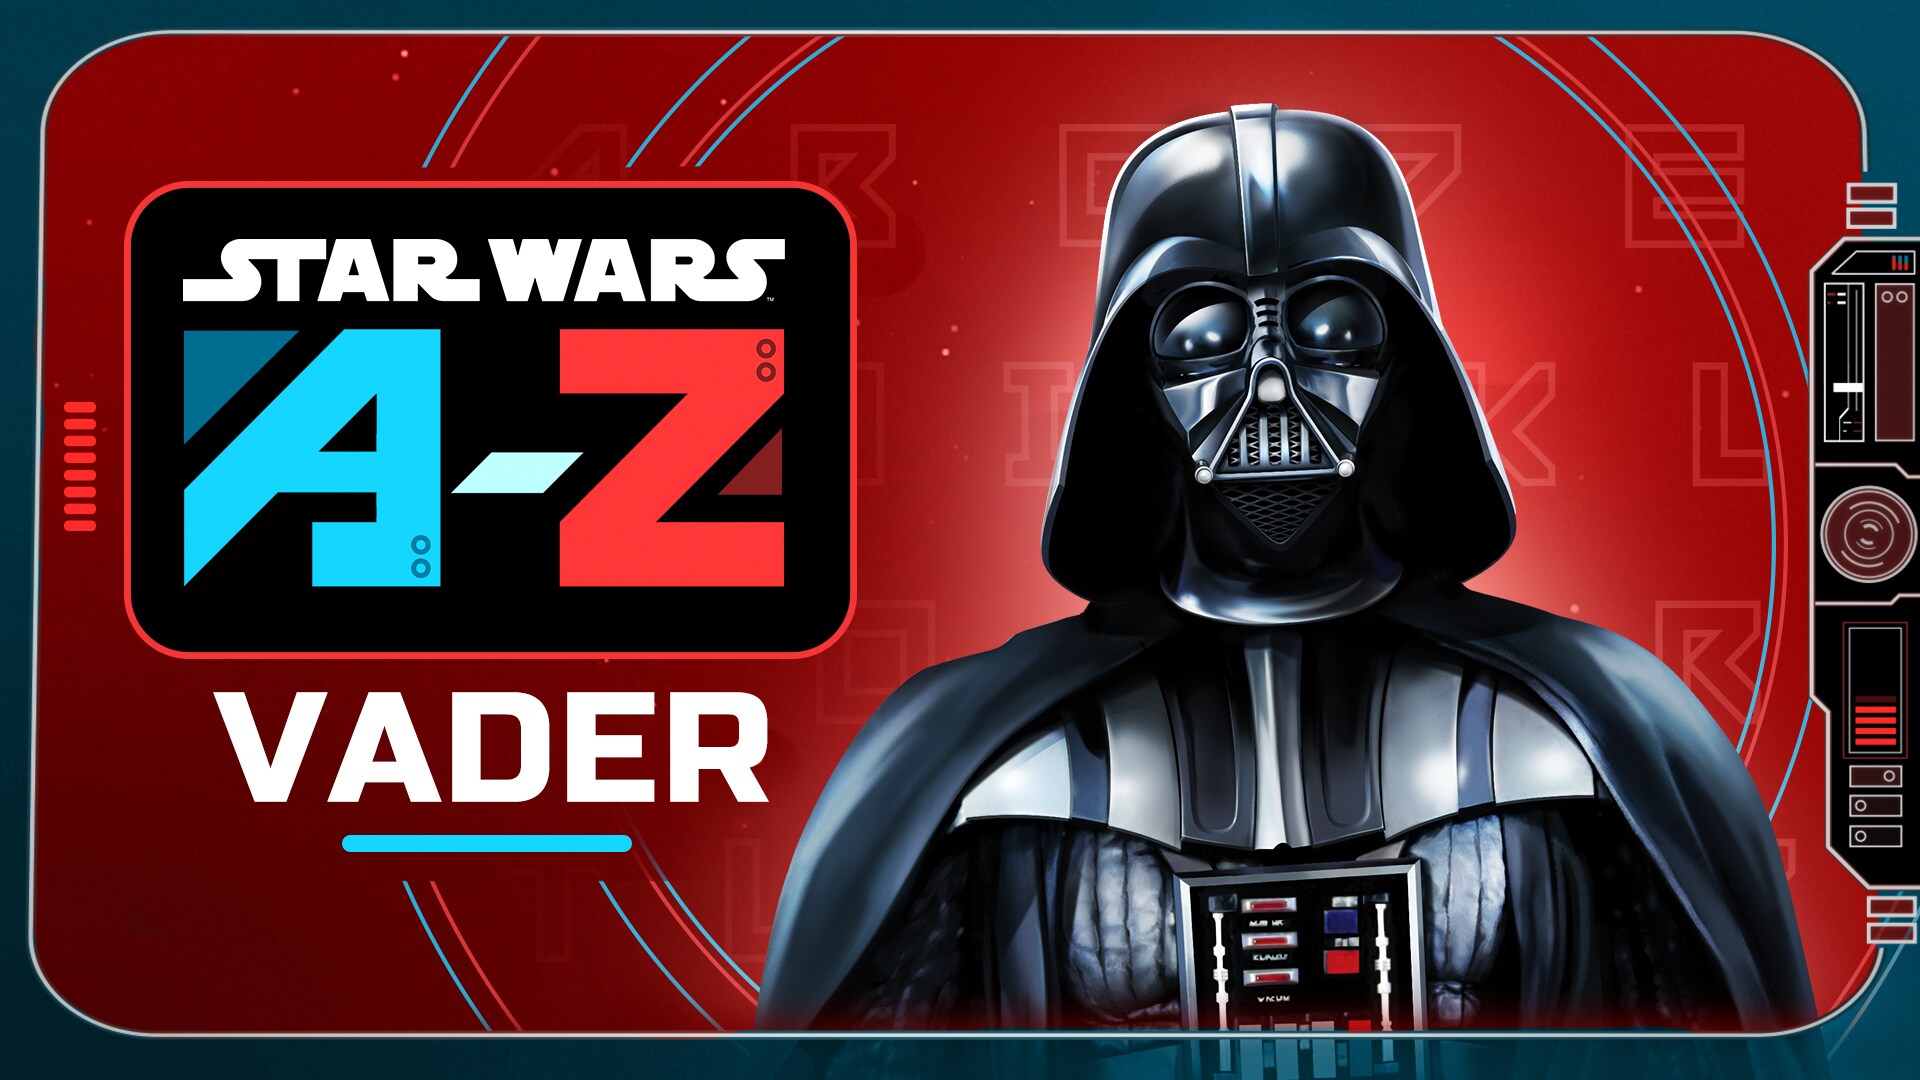 Why Darth Vader Is a Formidable Foe | Star Wars A to Z